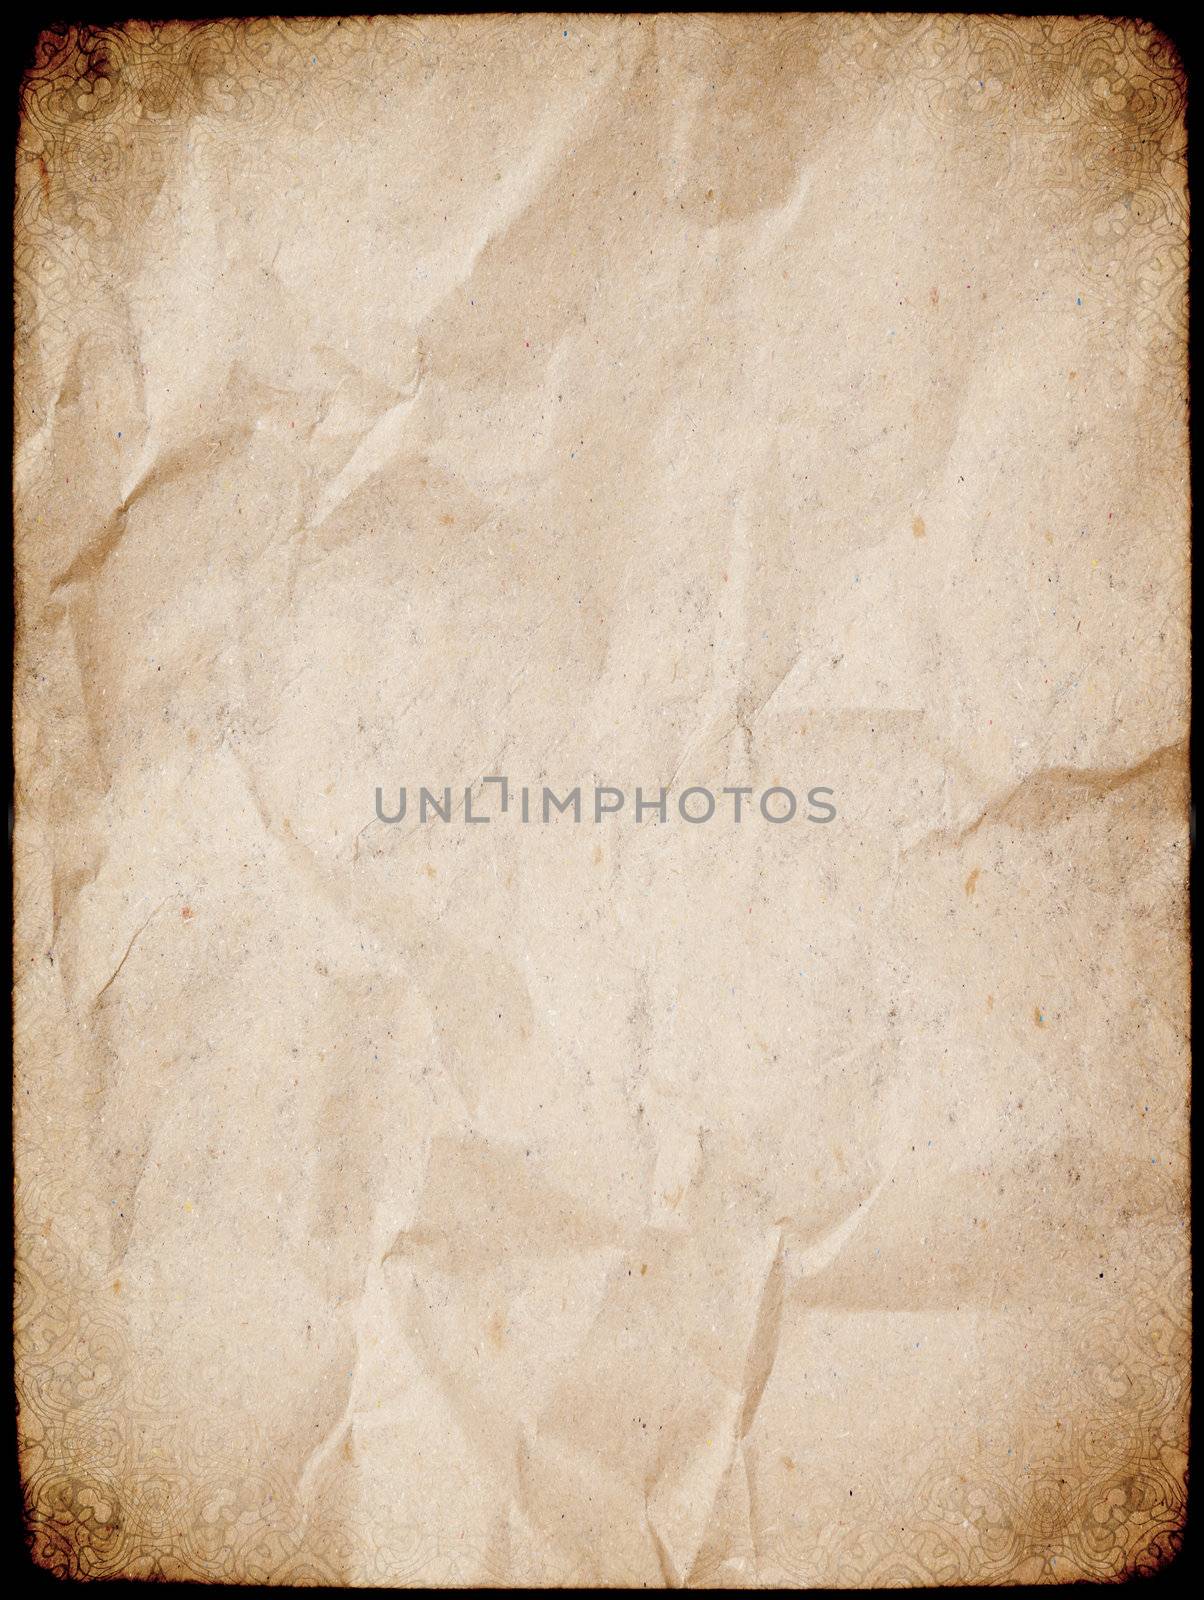 An image of an old paper background